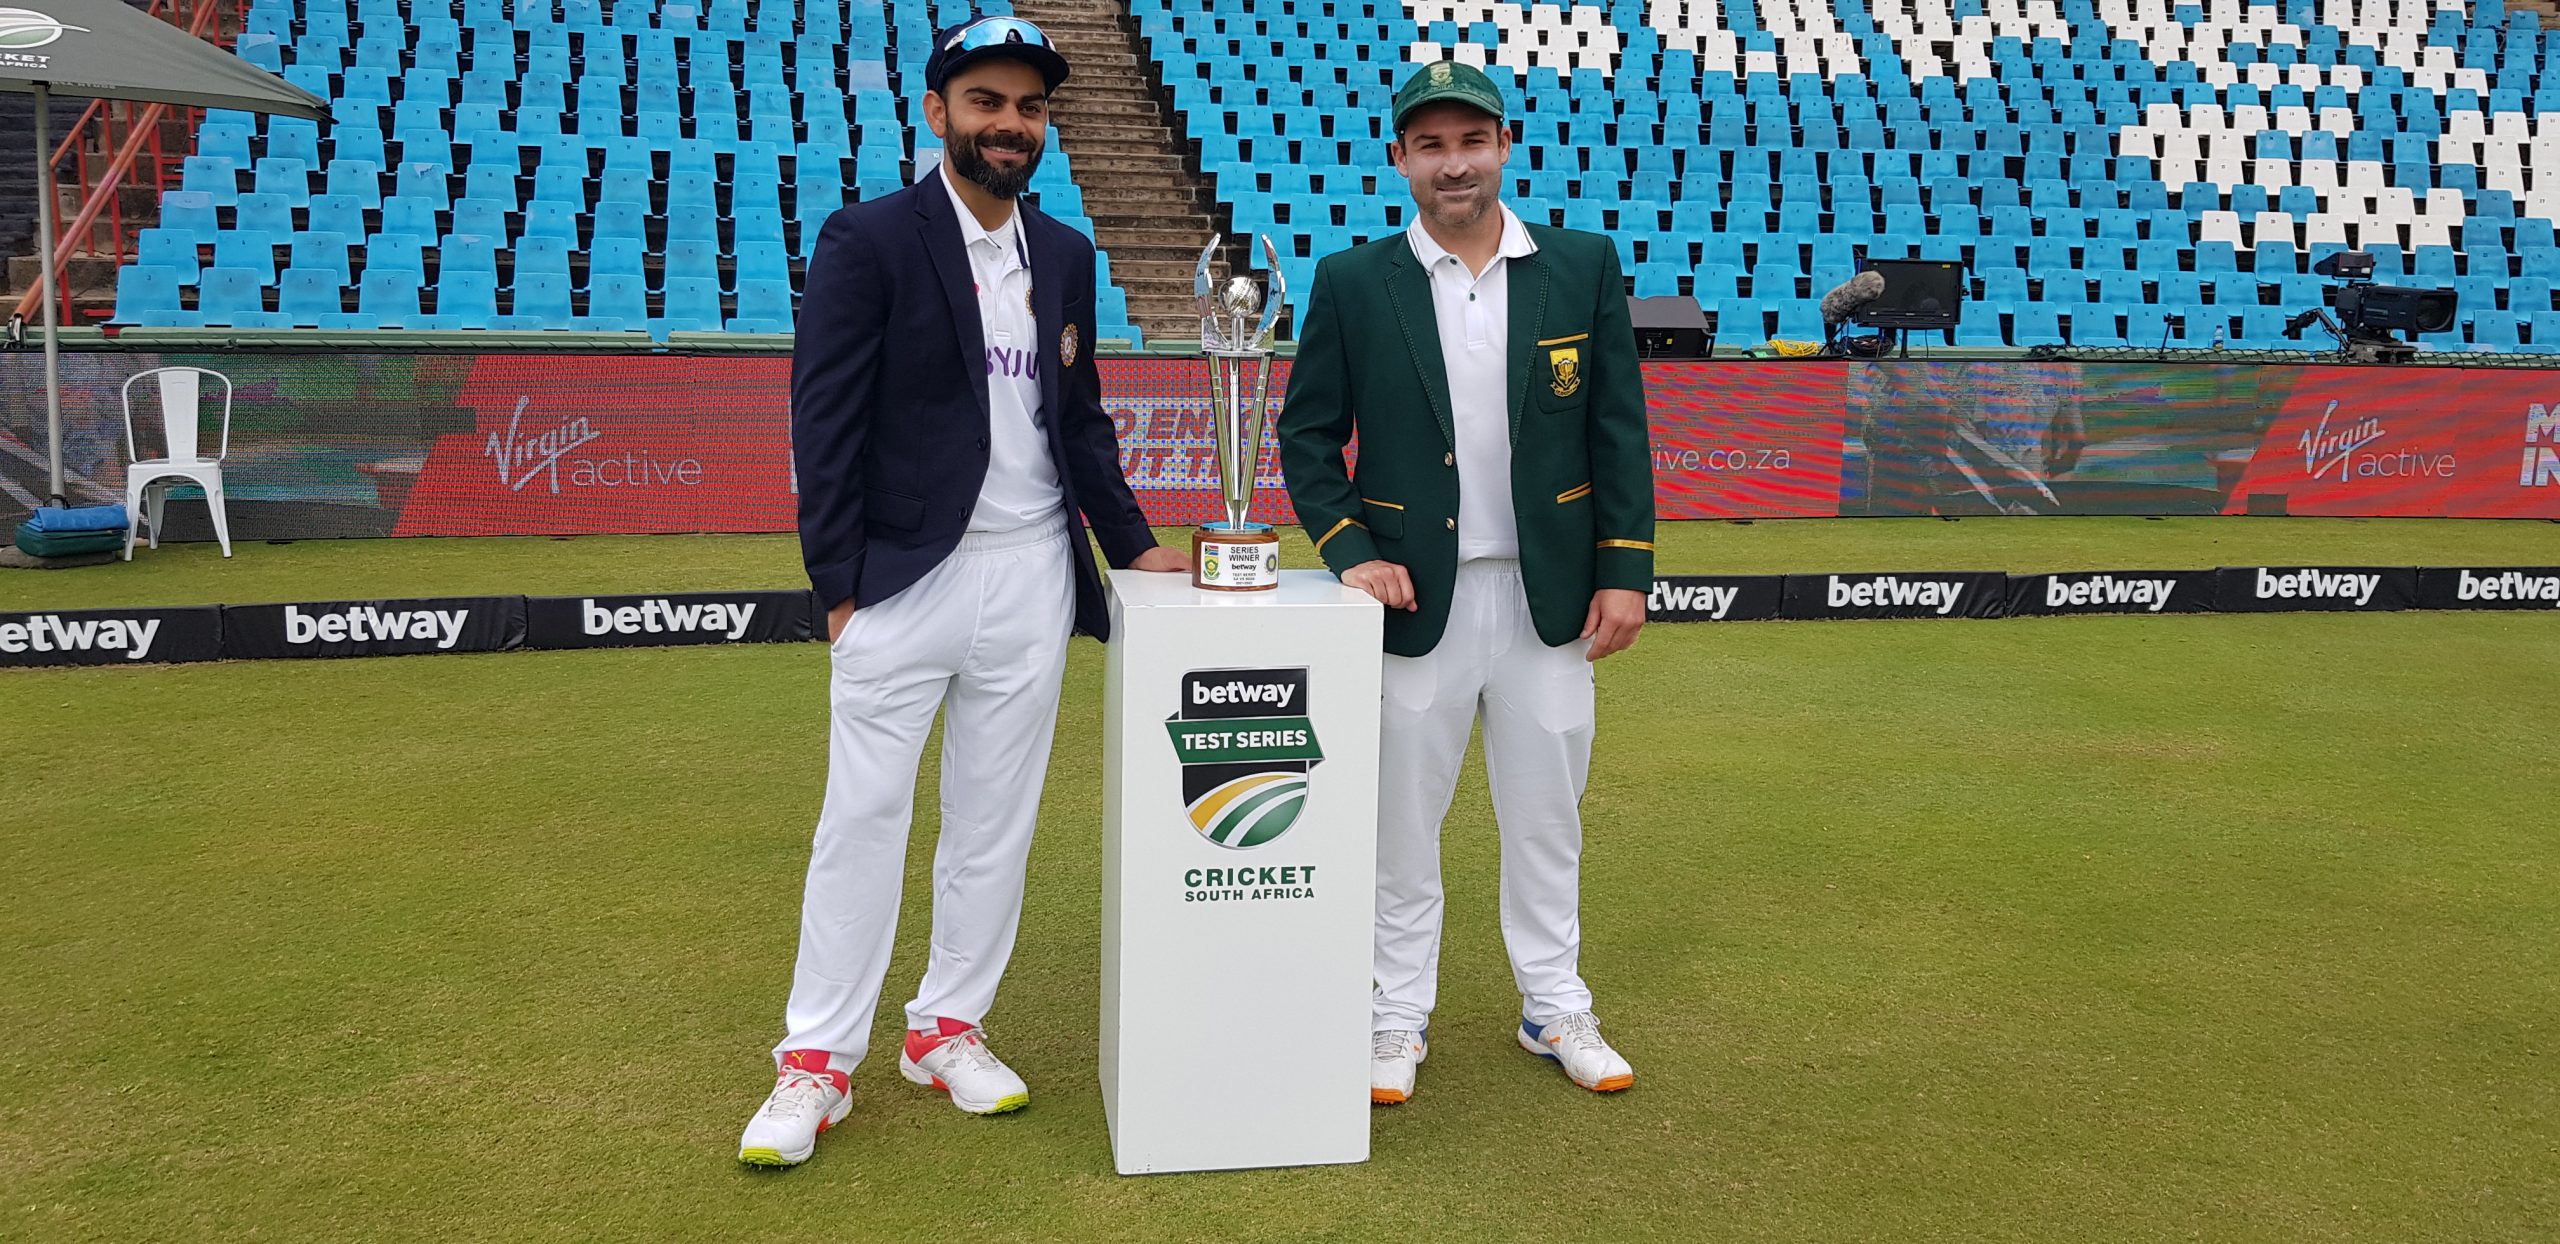 South Africa vs India 2021: 2nd Test – Who Will Win The Test Match?